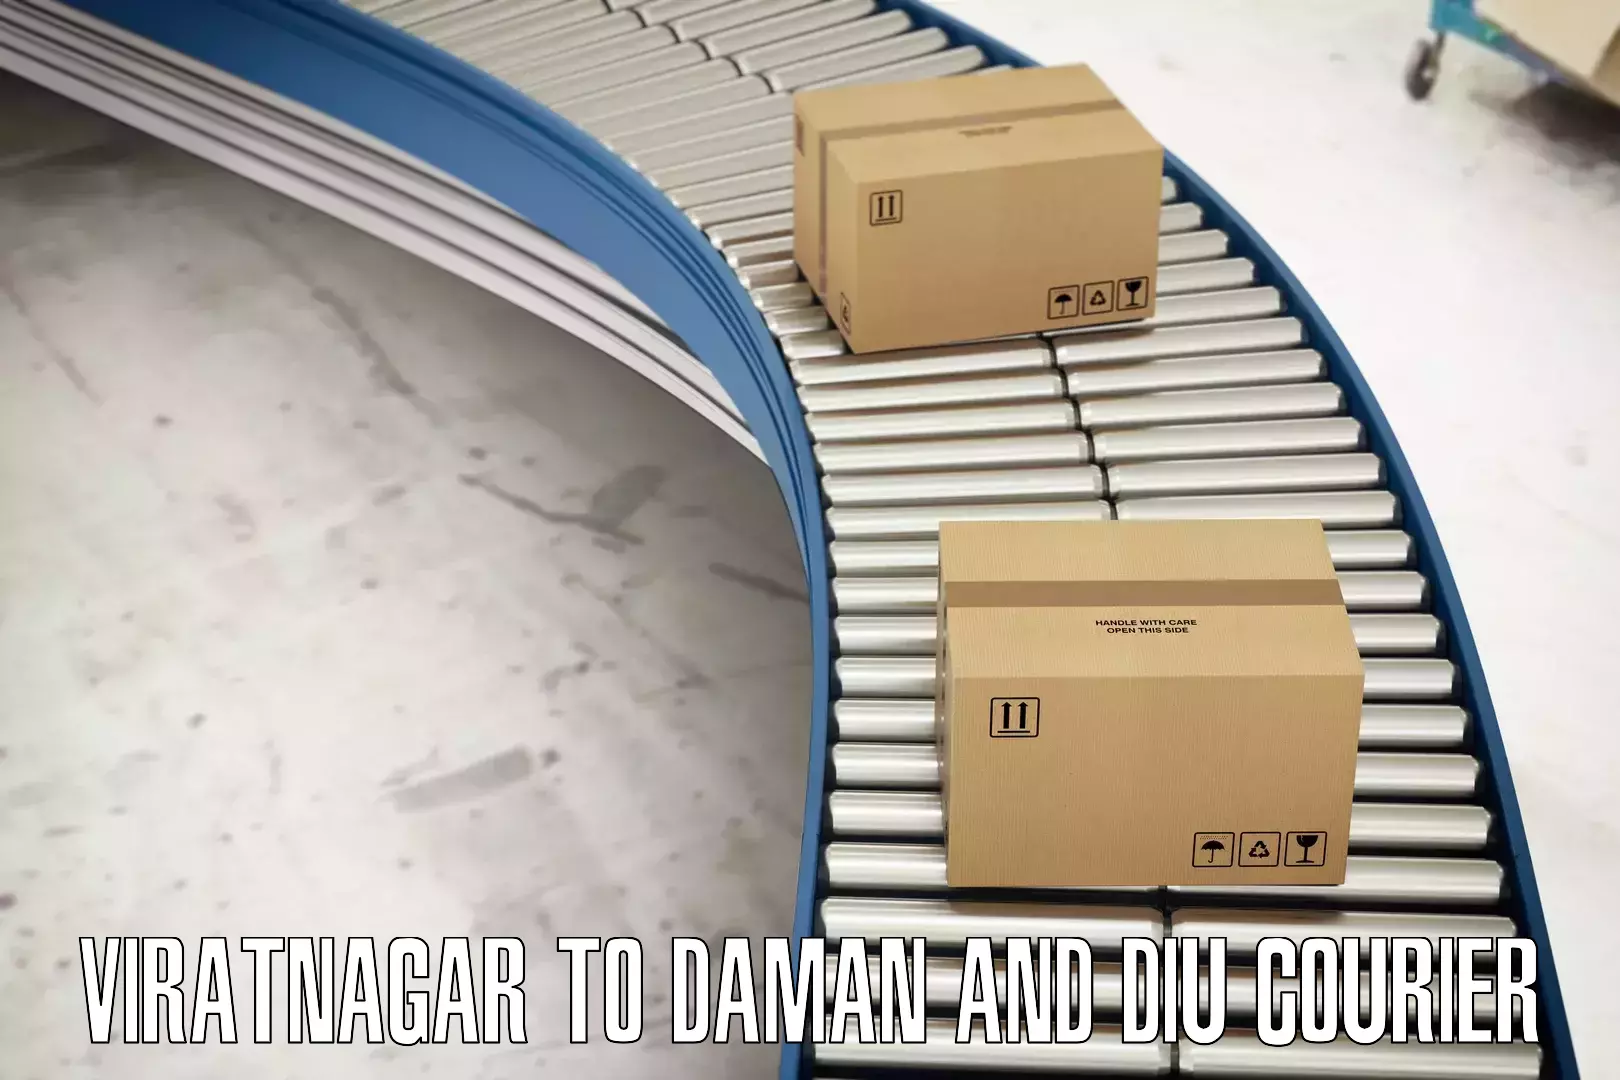 Round-the-clock parcel delivery Viratnagar to Daman and Diu